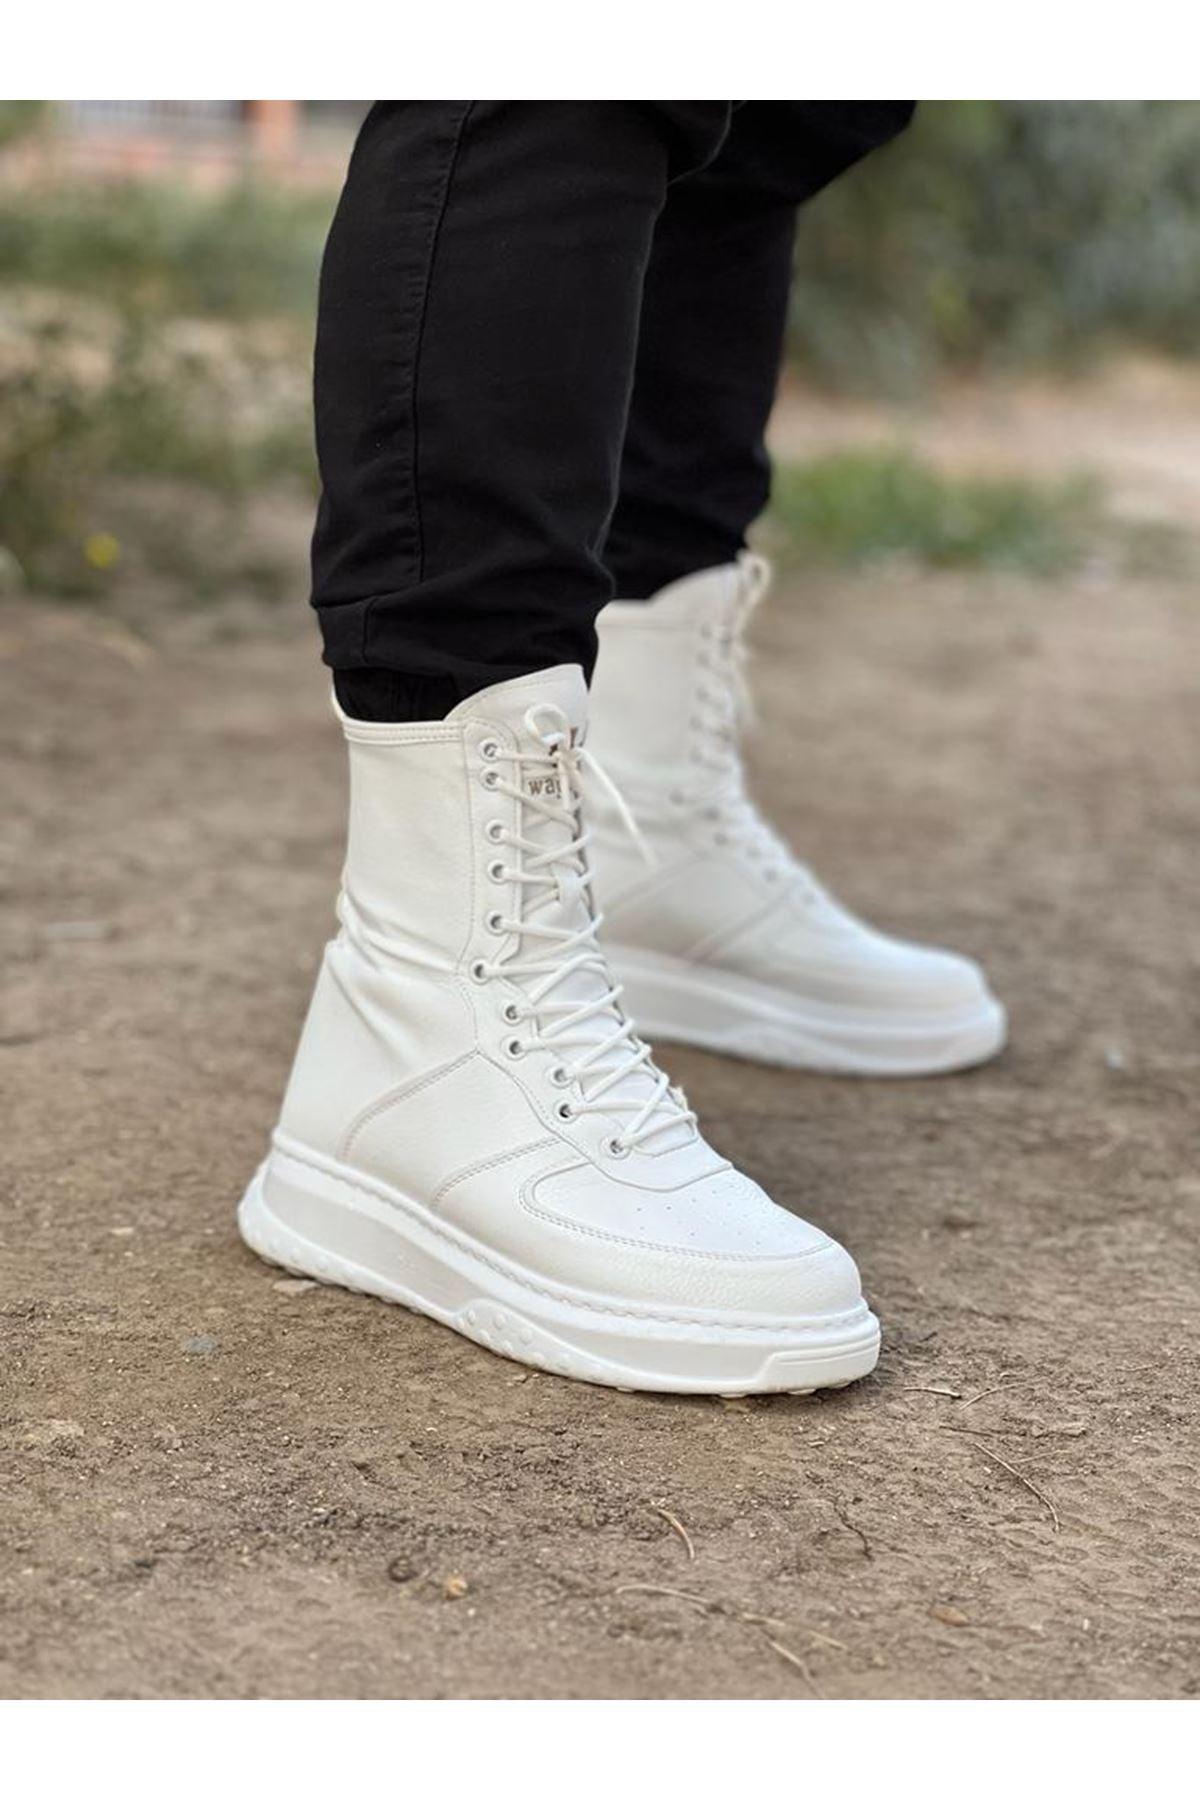 WG012 White Skin Long Lace-Up Boots - STREET MODE ™